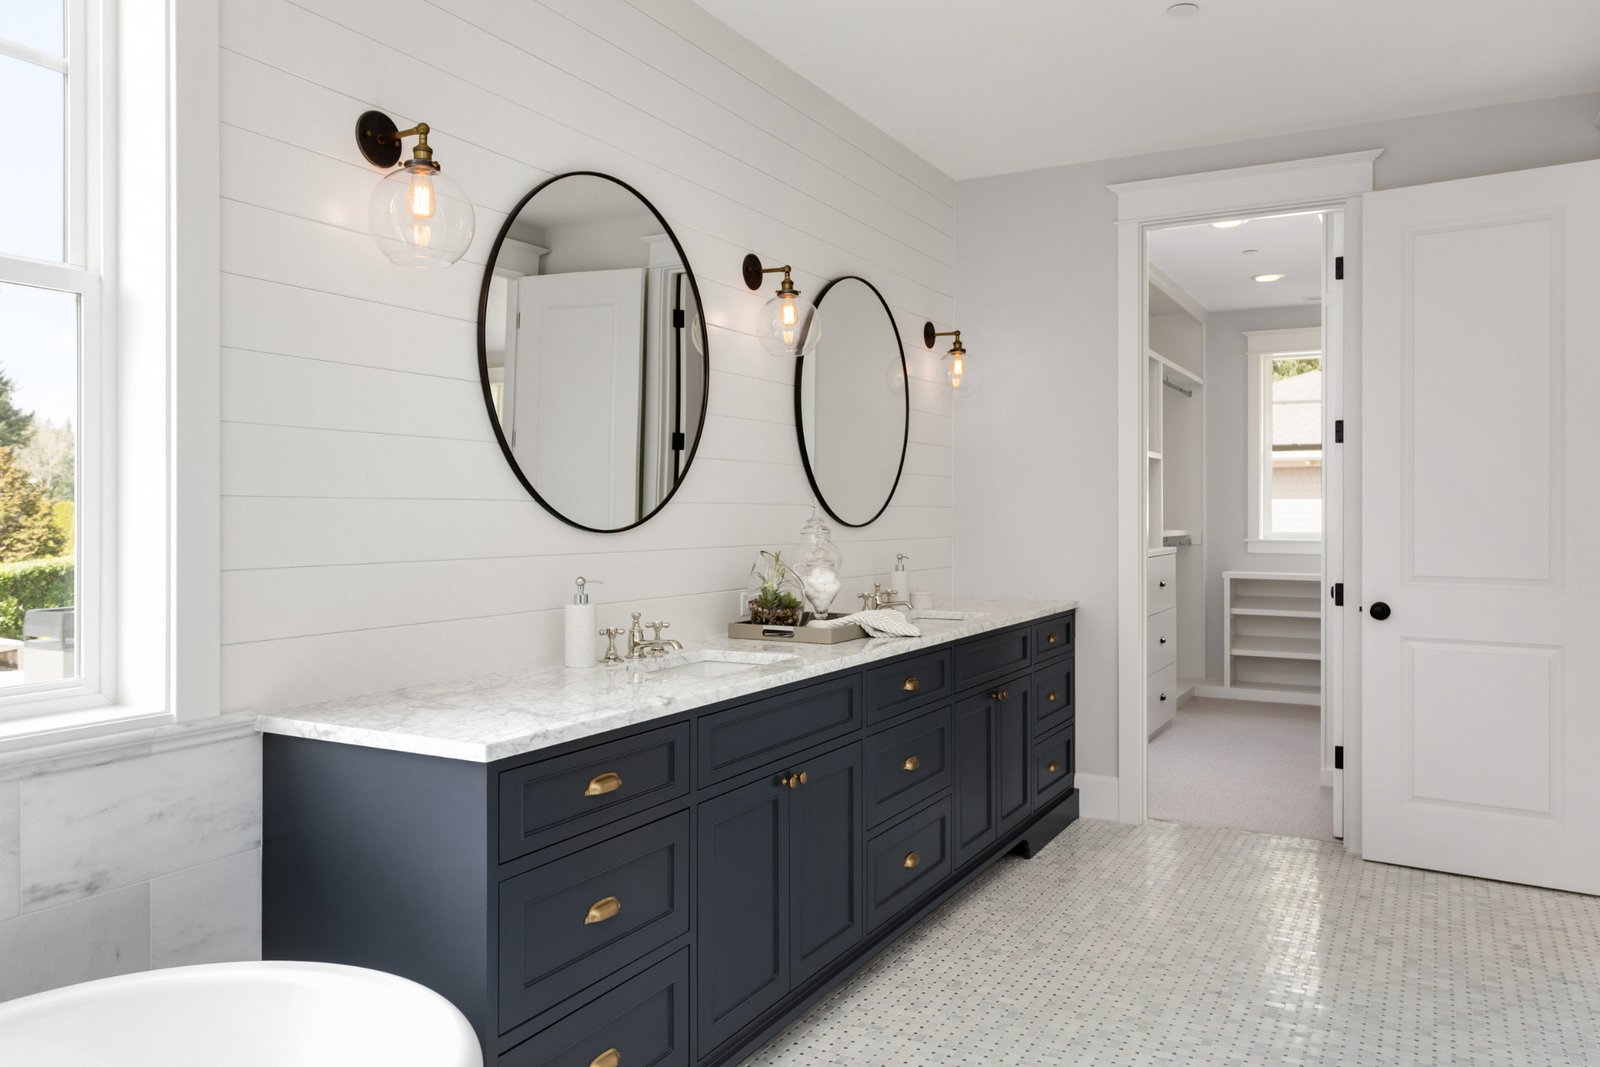 A beautifully renovated bathroom in Asbury Park, NJ with a dark blue vanity along with black hardware, faucet, circular mirrors, and lights.